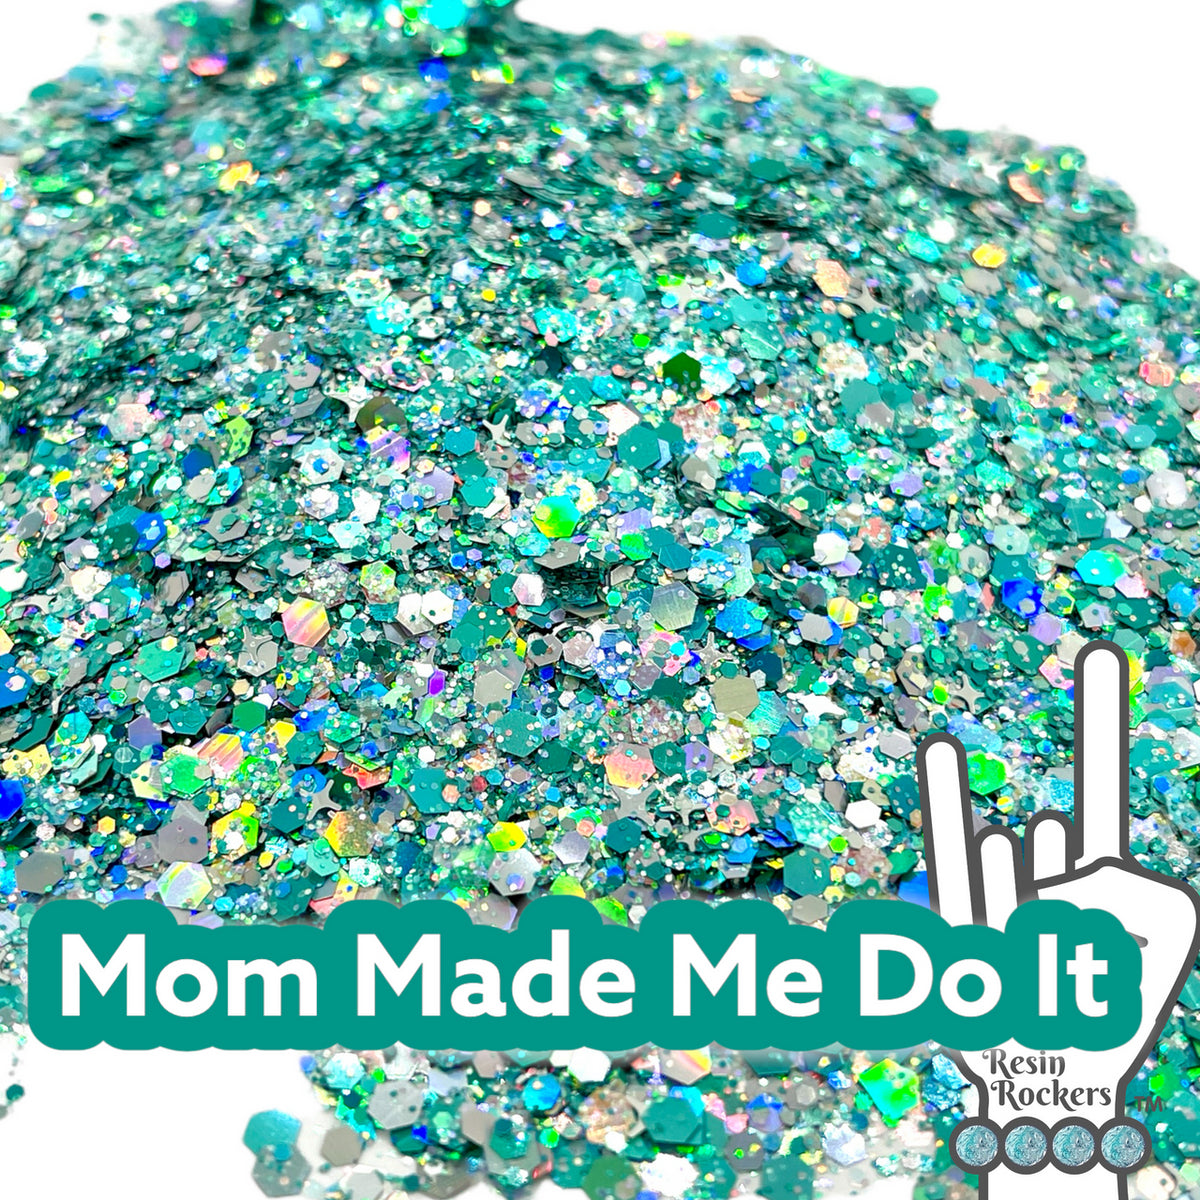 Mom Made Me Do It Premium Pixie for Poxy Chunky Glitter Mix